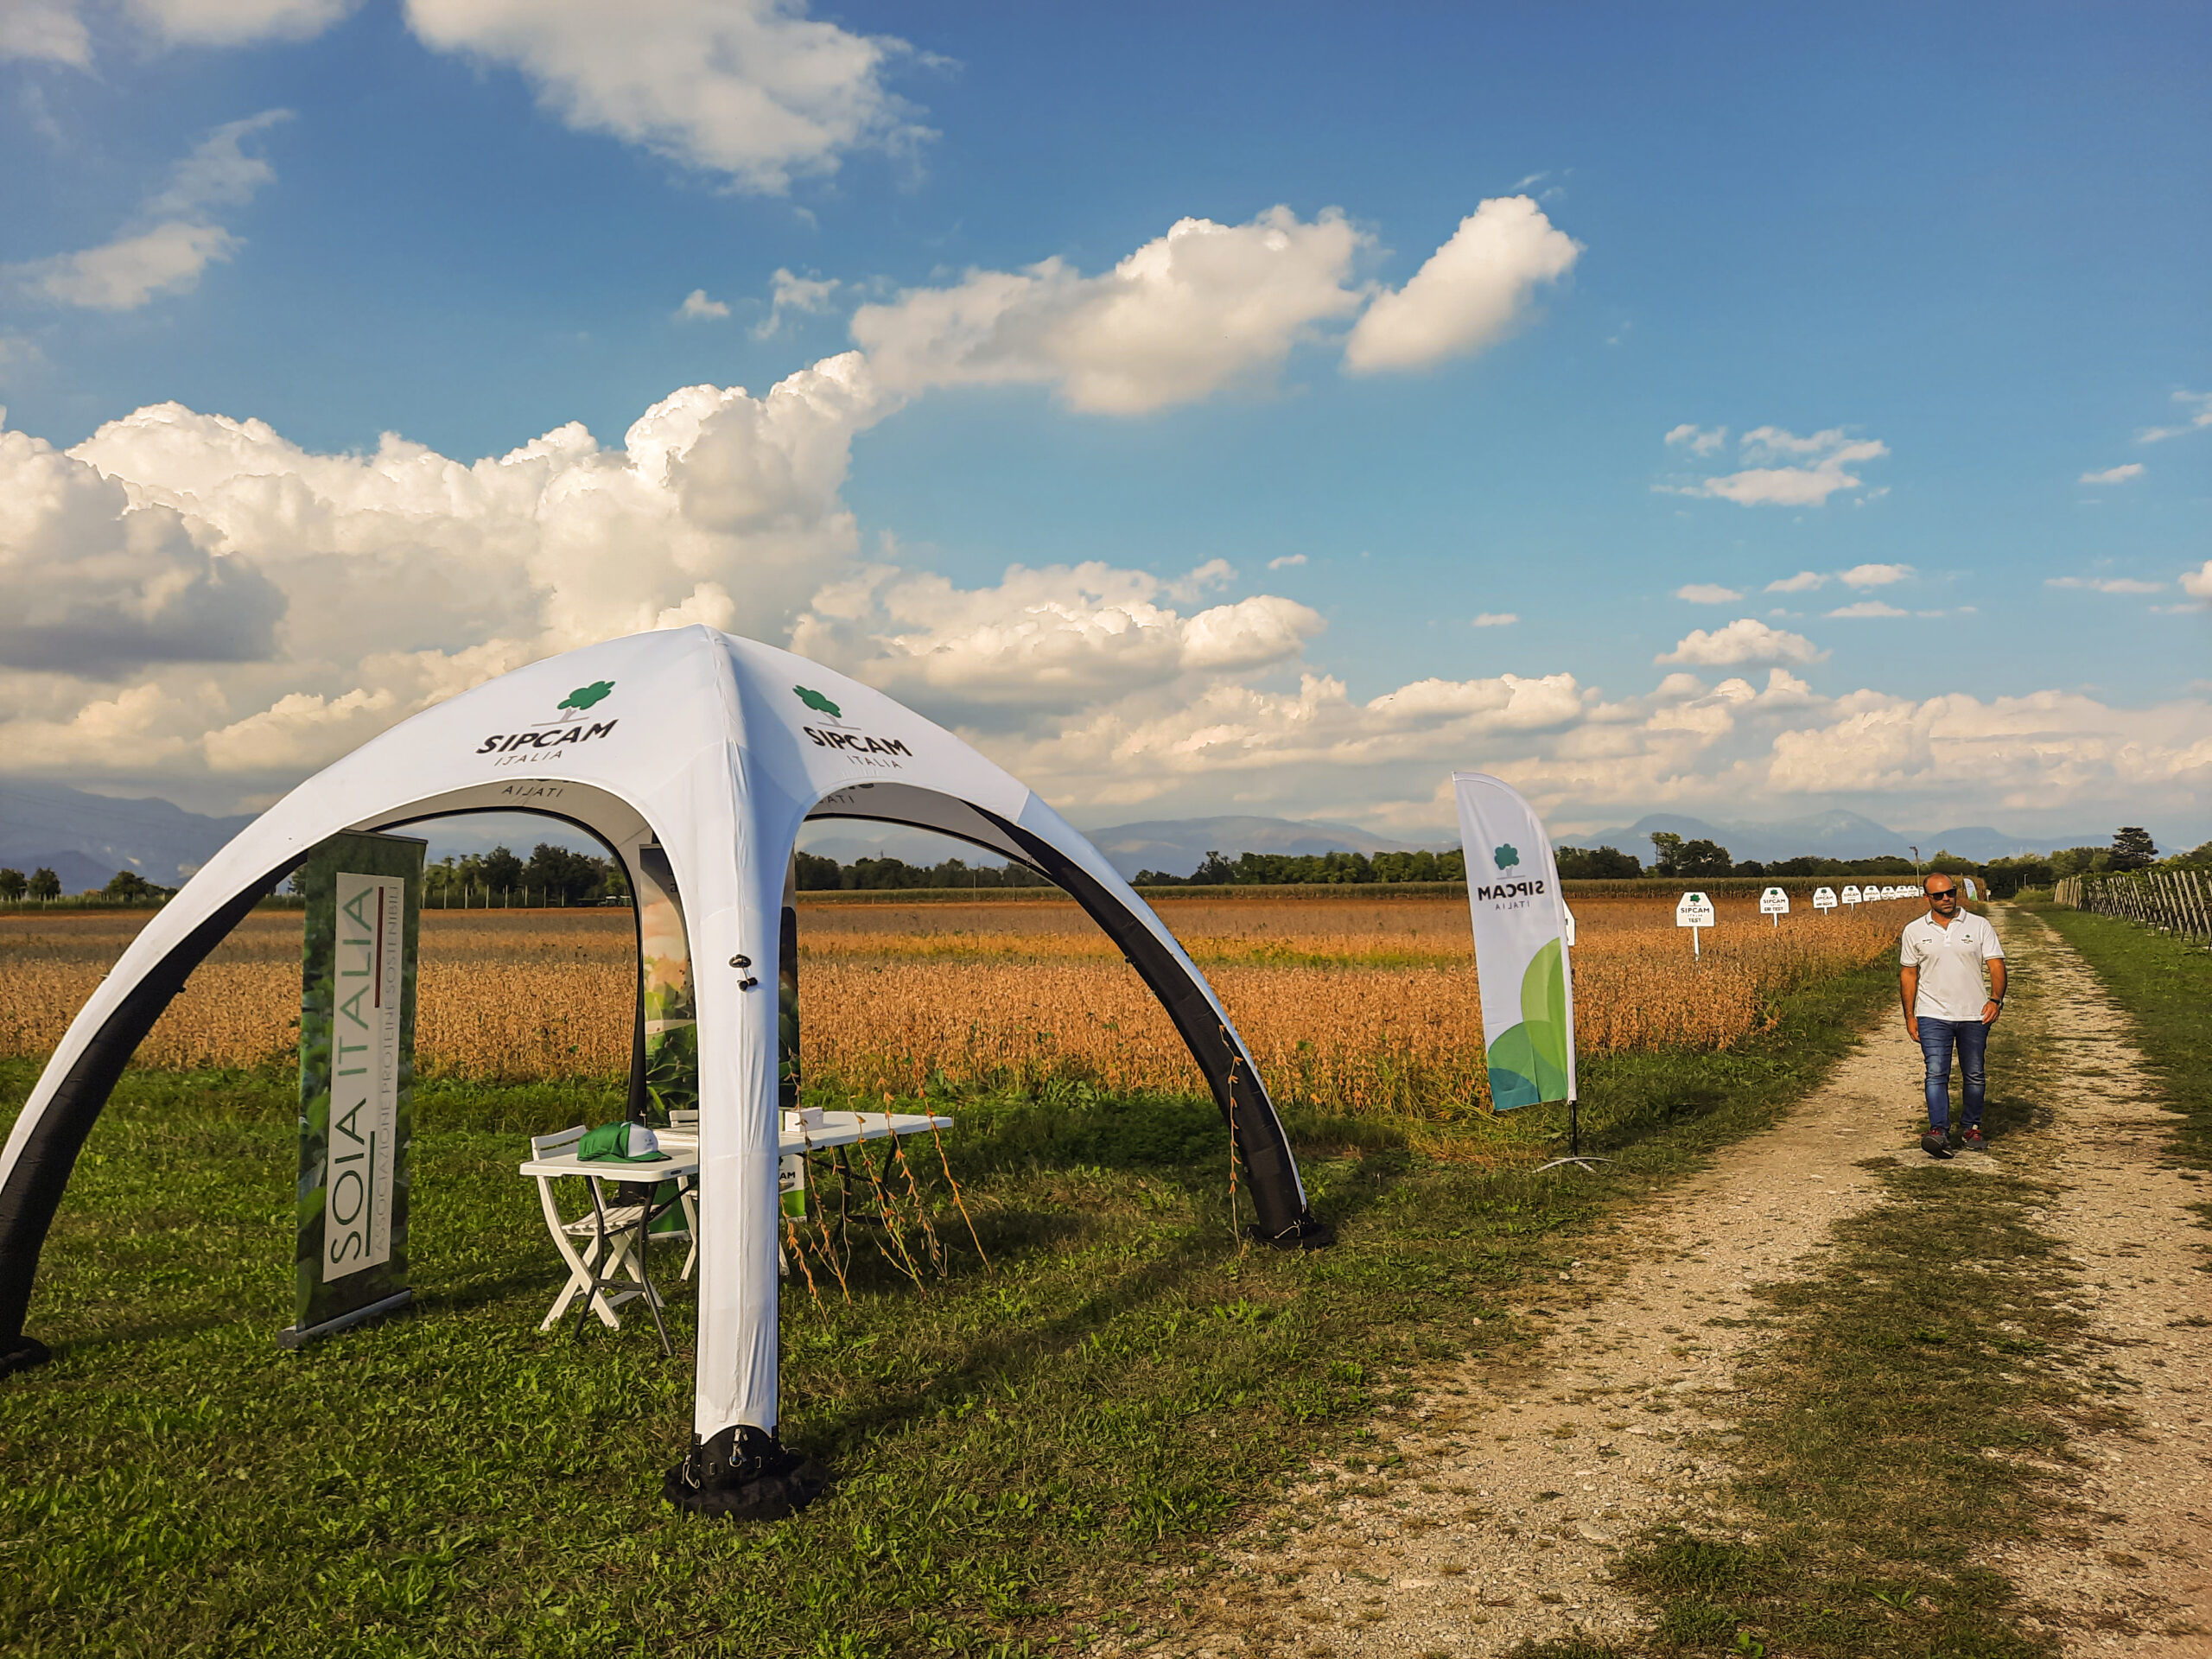 sip cam tent in a testing field